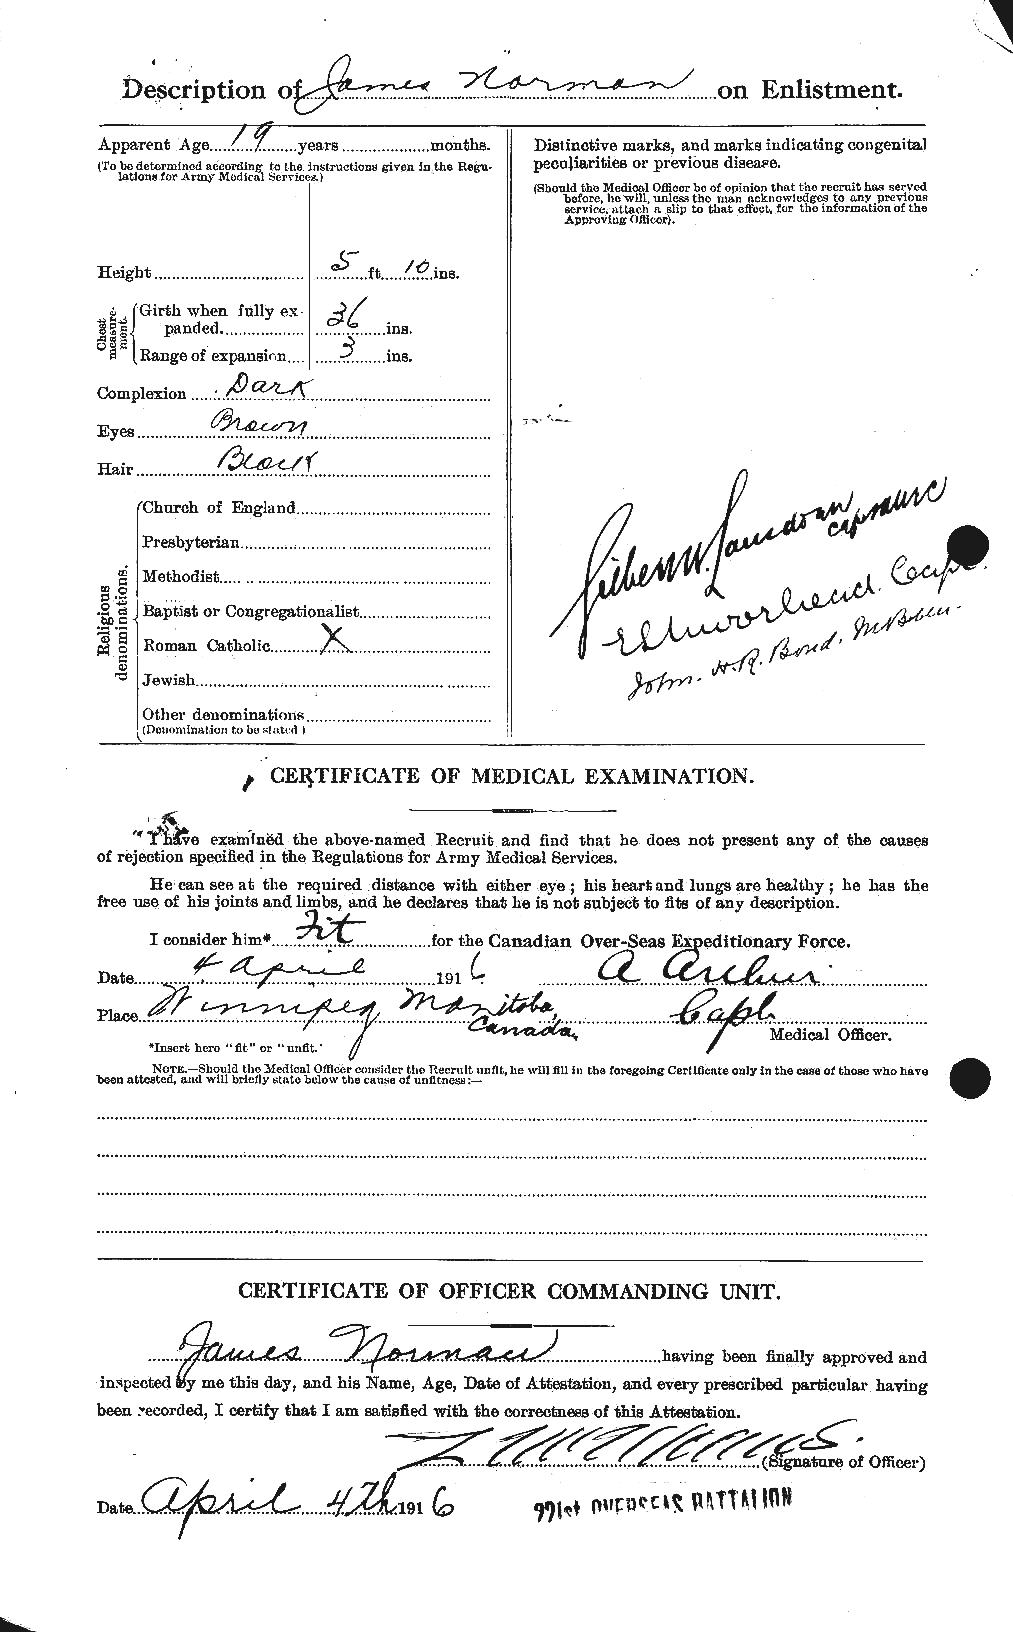 Personnel Records of the First World War - CEF 552131b